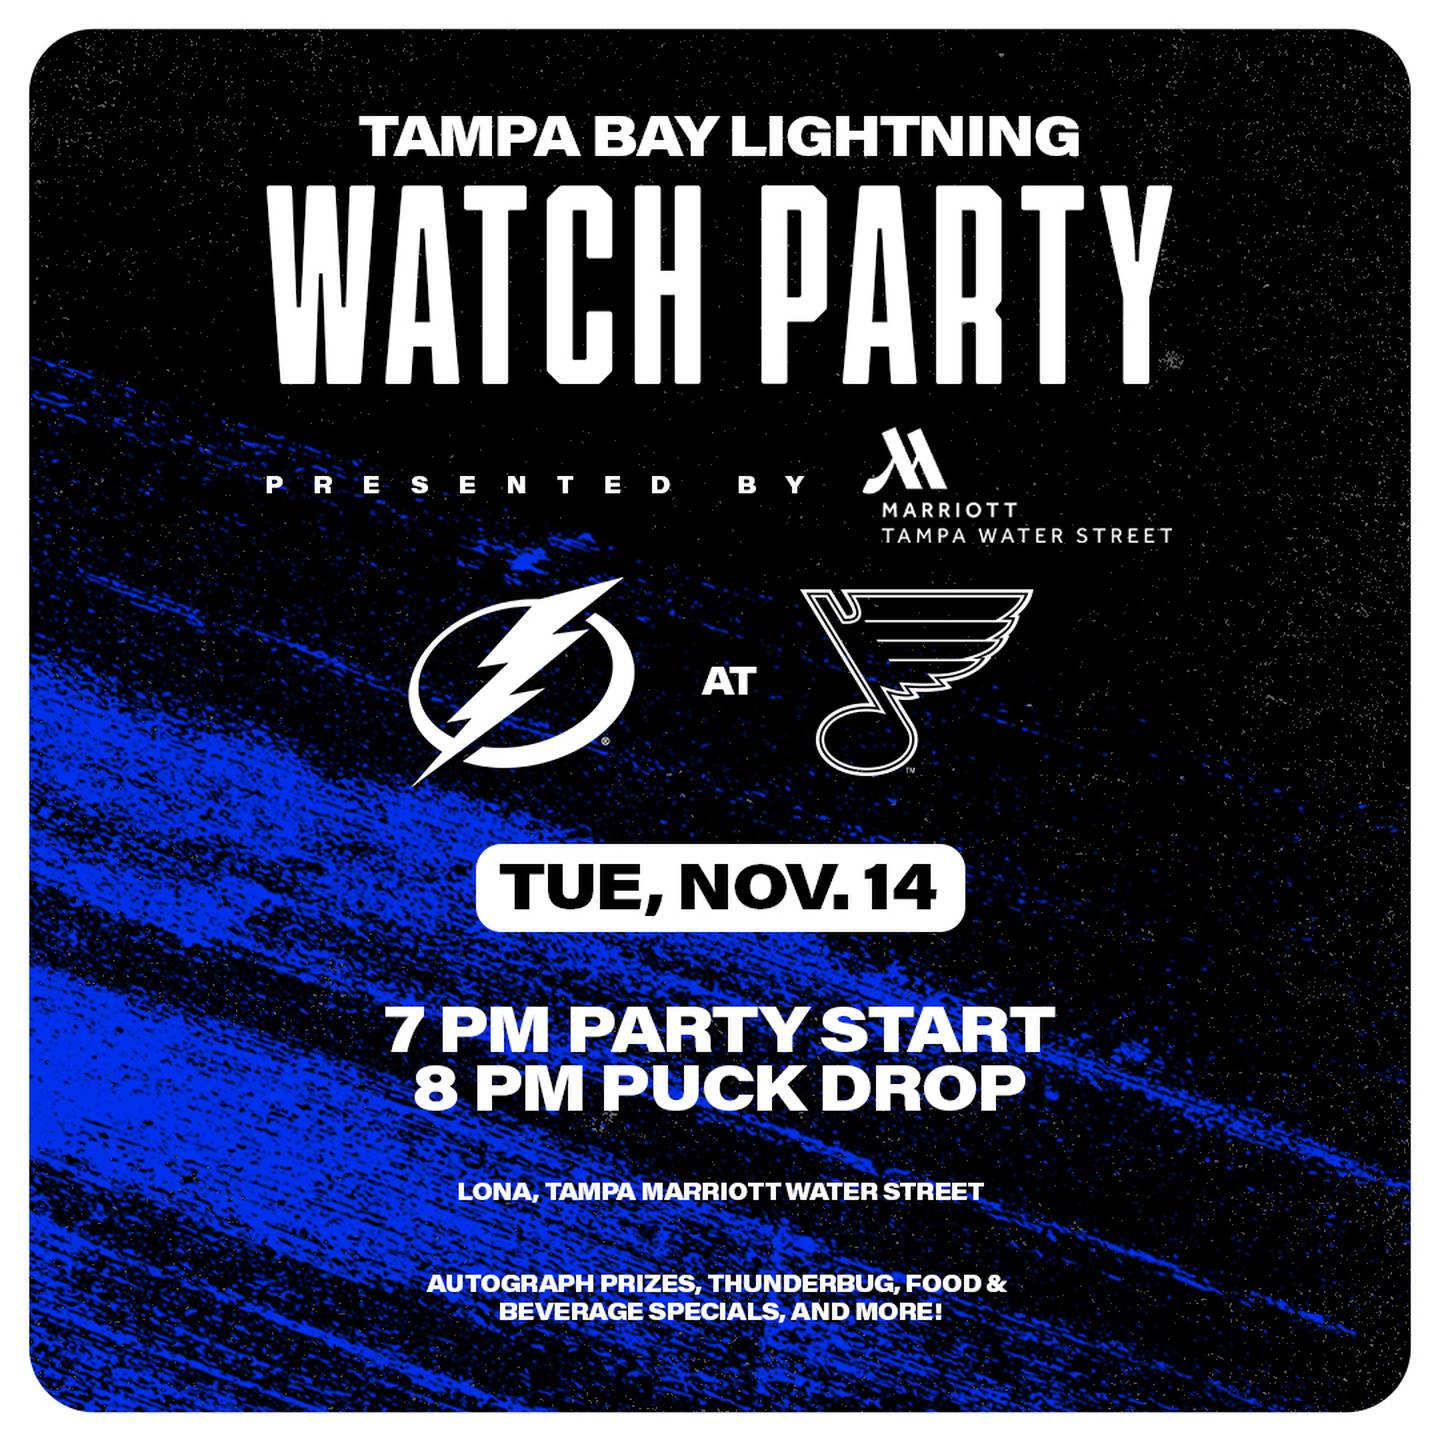 Tampa Bay Lightning vs. St. Louis Blues Watch Party